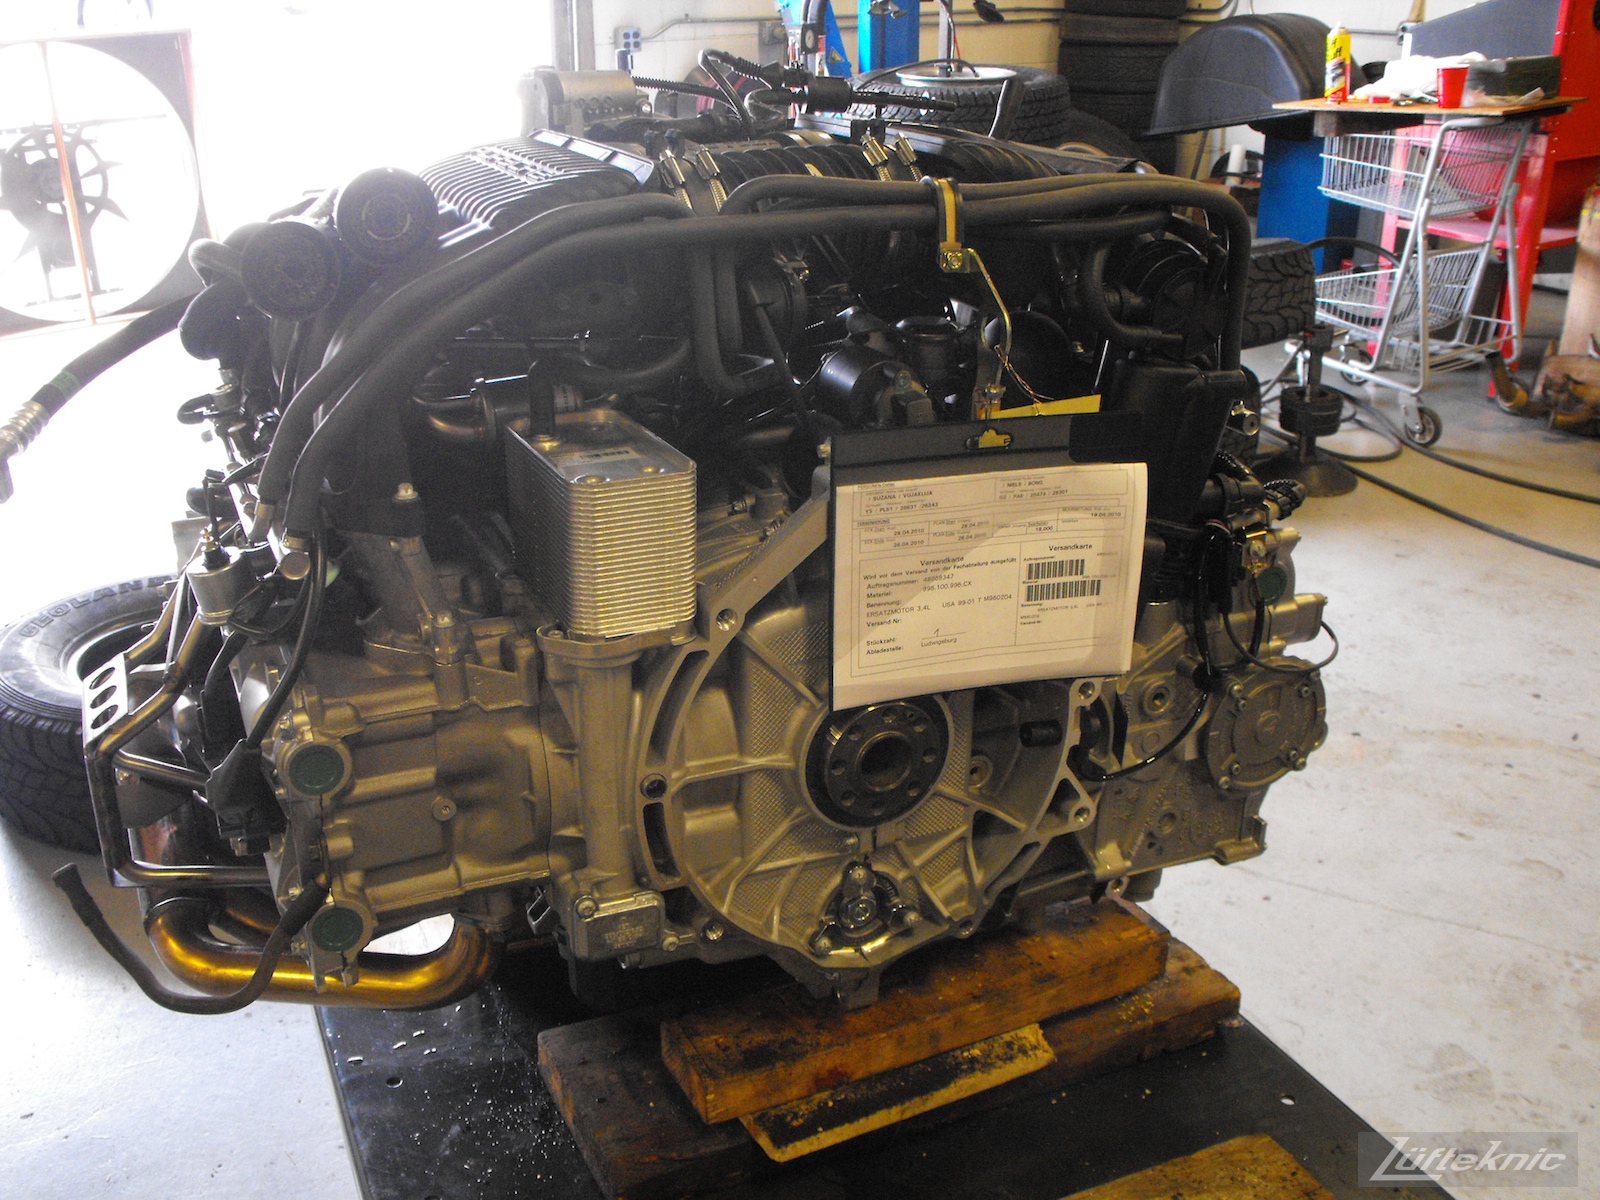 A brand new M96 Porsche motor sits on an engine table with technical sheet attached.